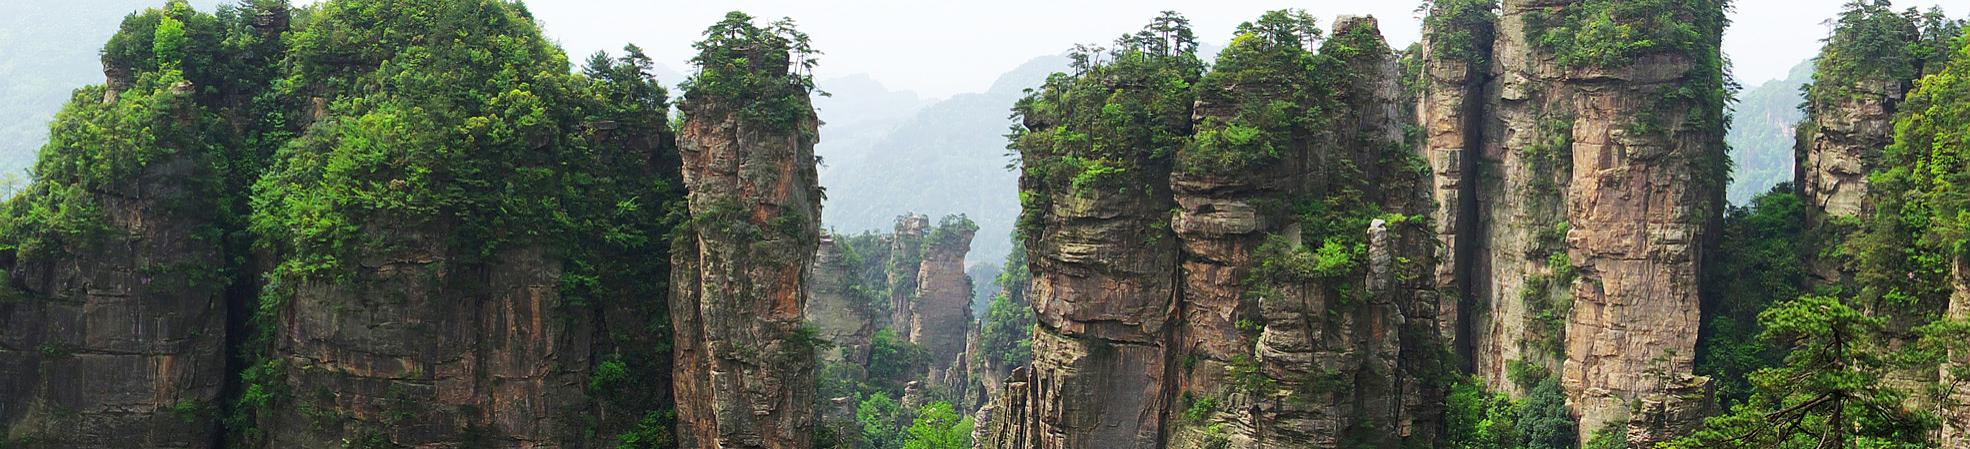 Top 8 Incredible Natural Arches and Bridges in China